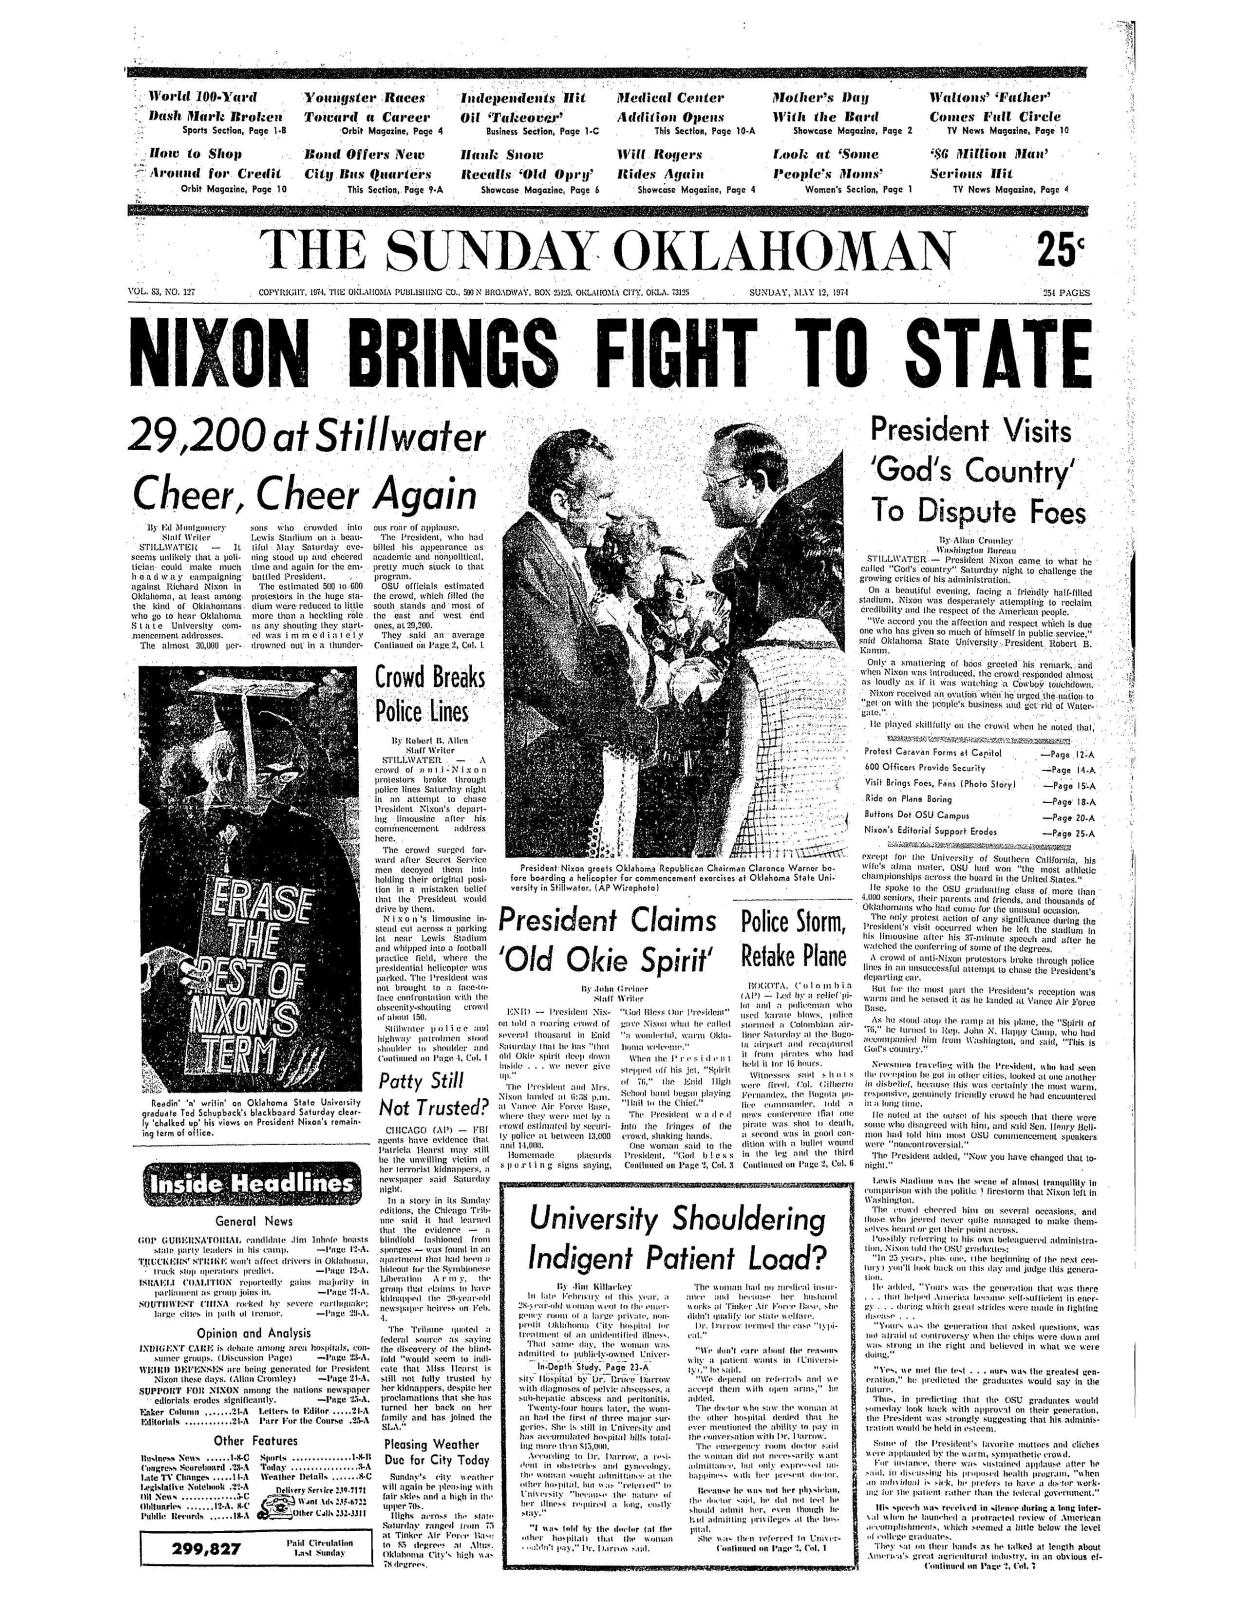 The front page of The Sunday Oklahoman on May 12, 1974.